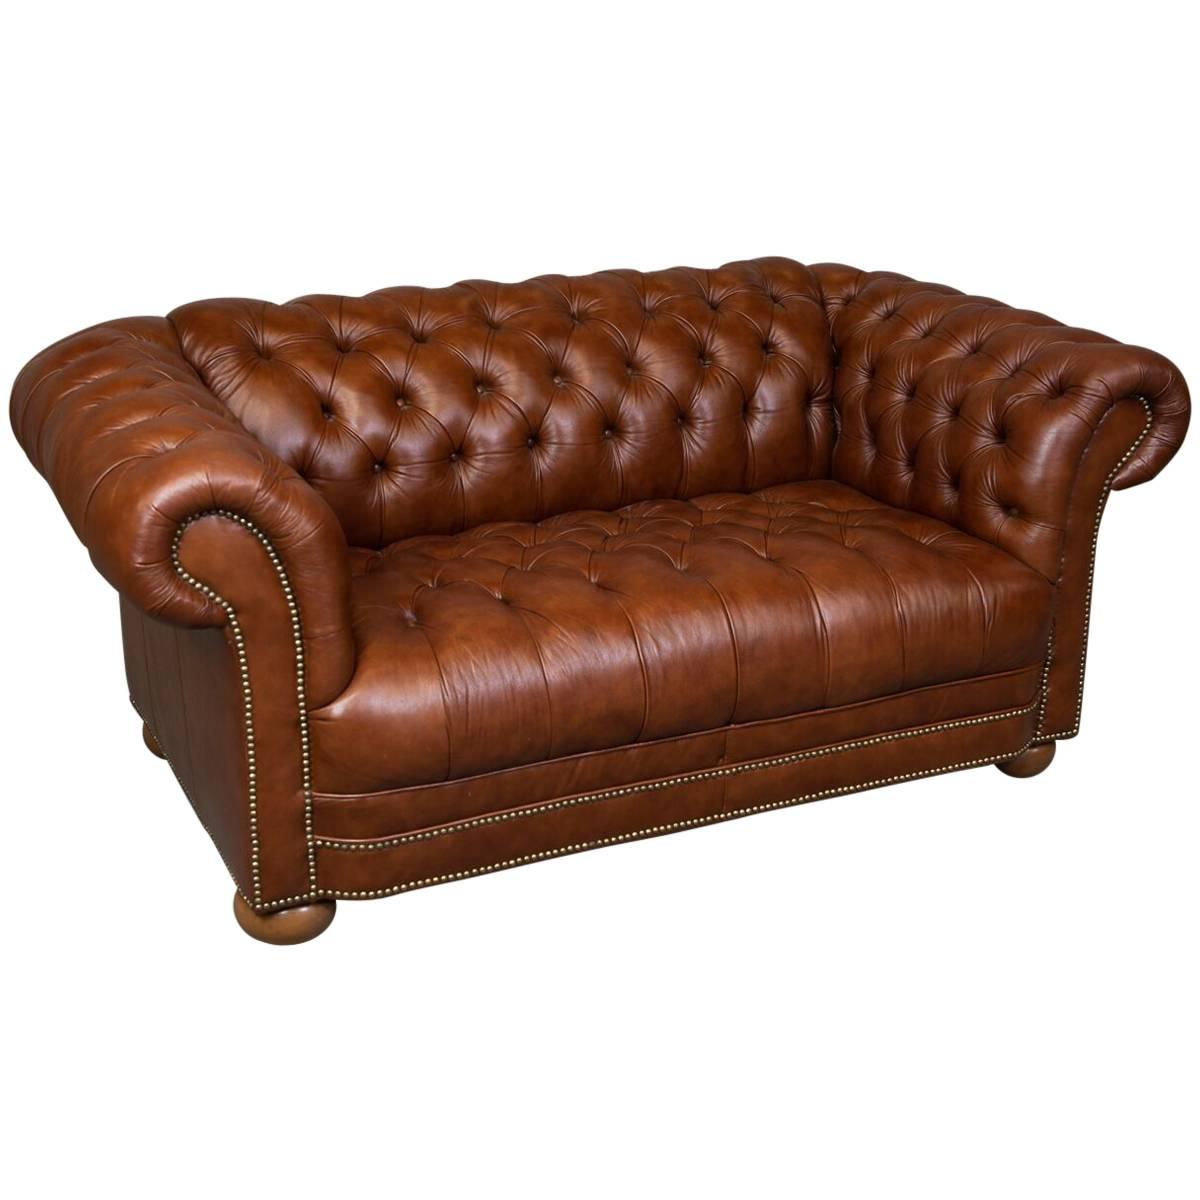 Vintage Tufted Leather Chesterfield Sofa For Sale